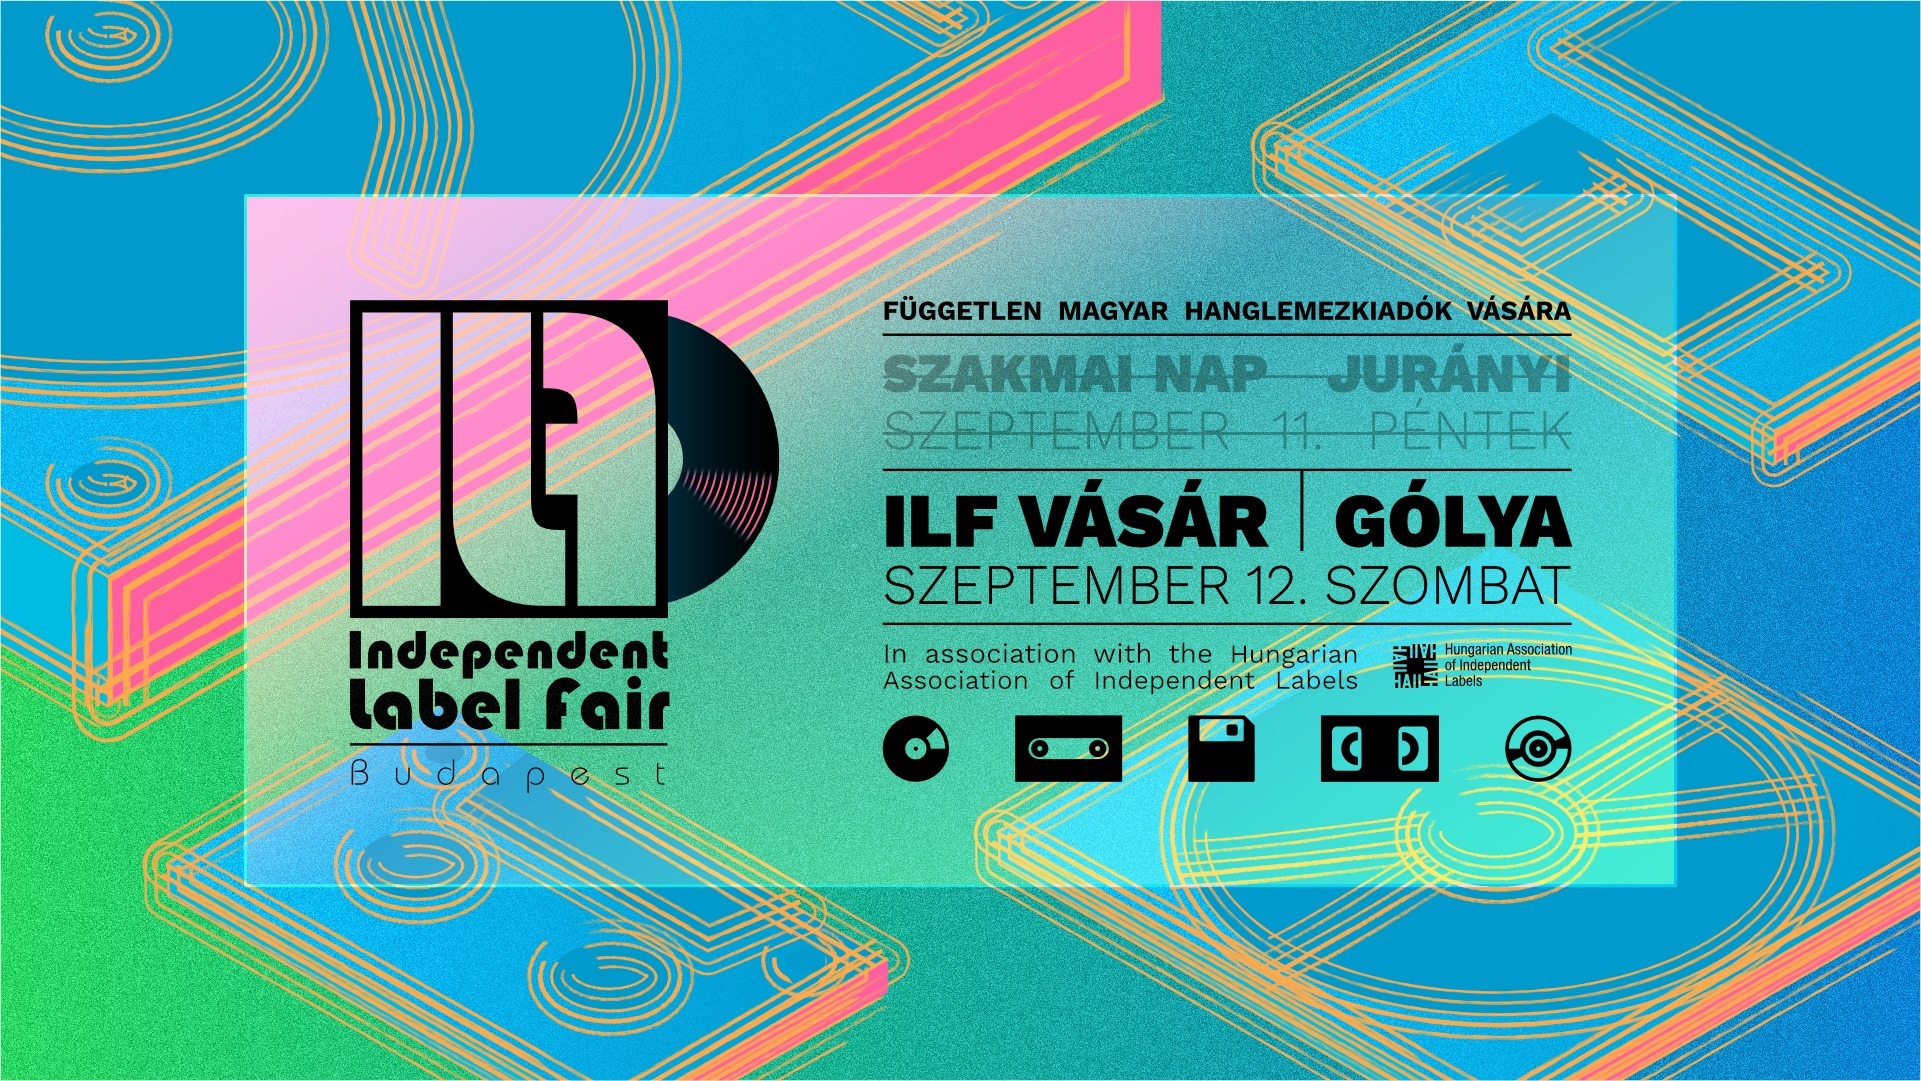 Independent Record Label Fair In Budapest, 12 September